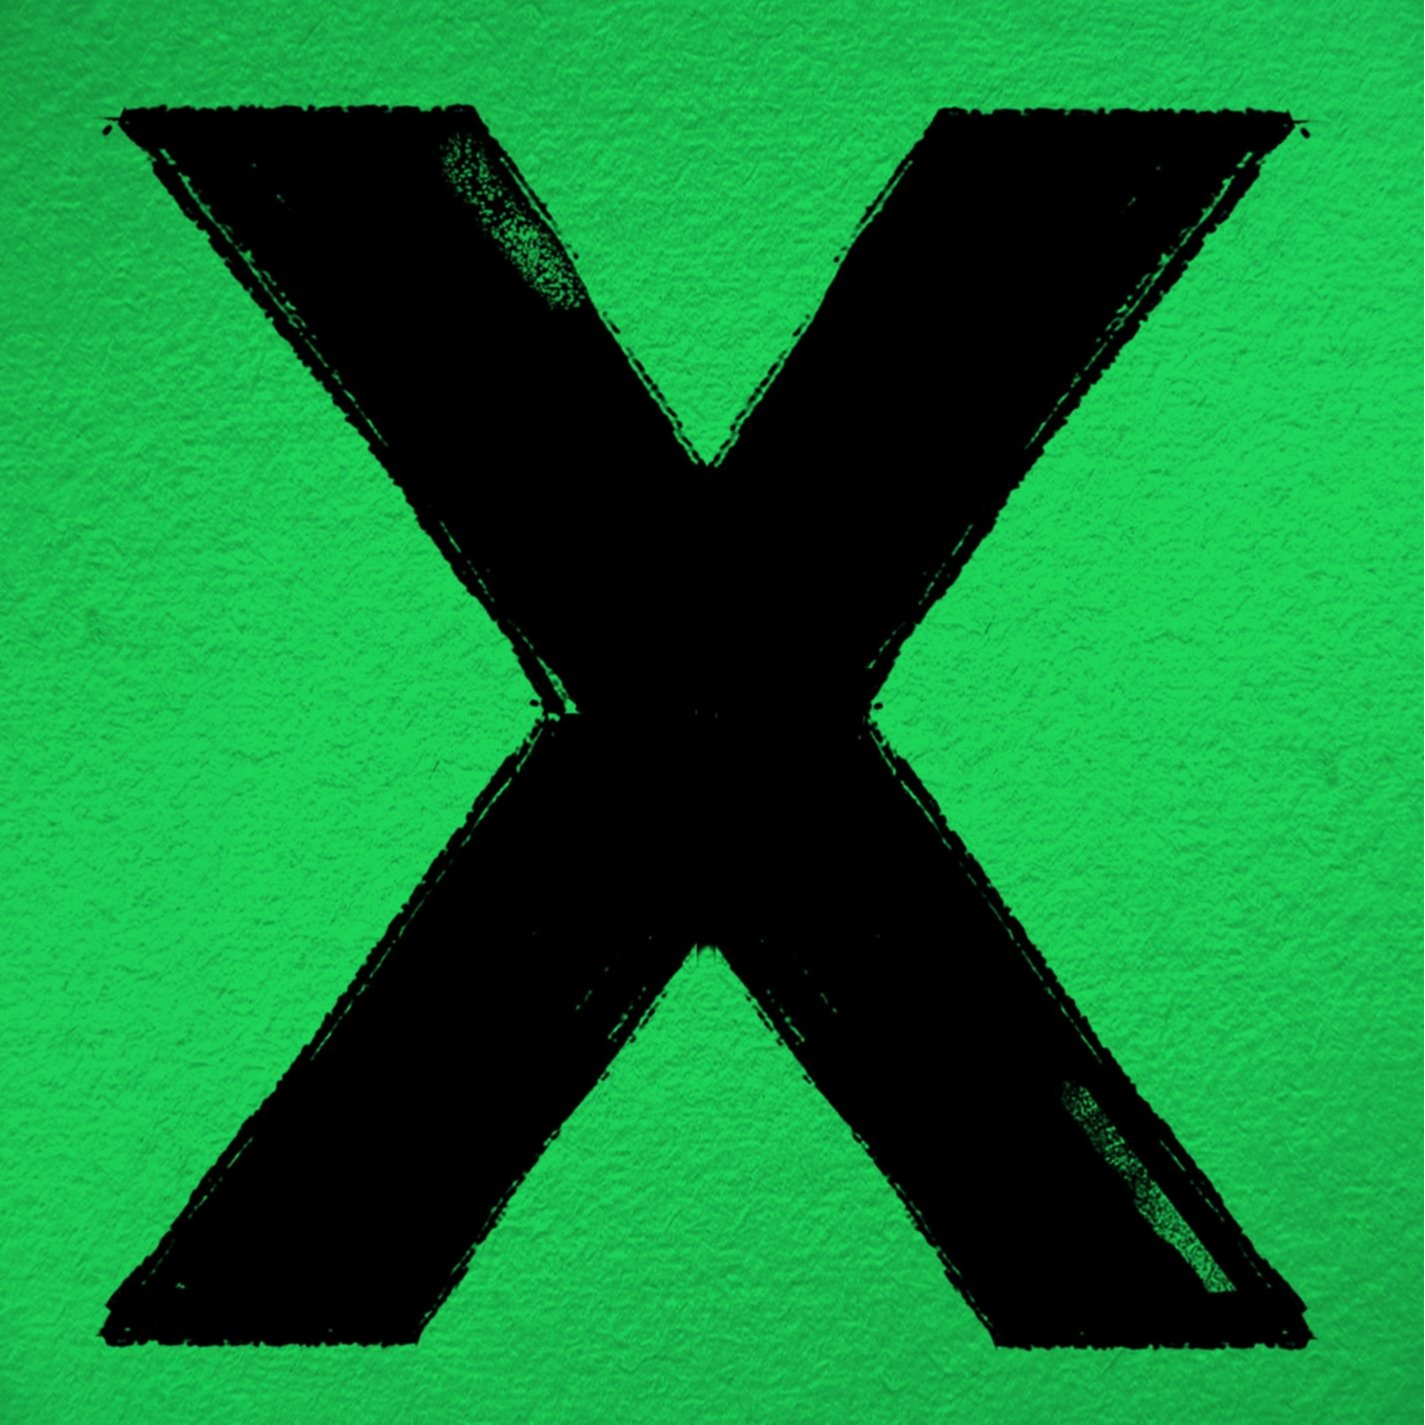 Thinking Out Loud歌词 歌手Ed Sheeran-专辑X (Deluxe Edition)-单曲《Thinking Out Loud》LRC歌词下载